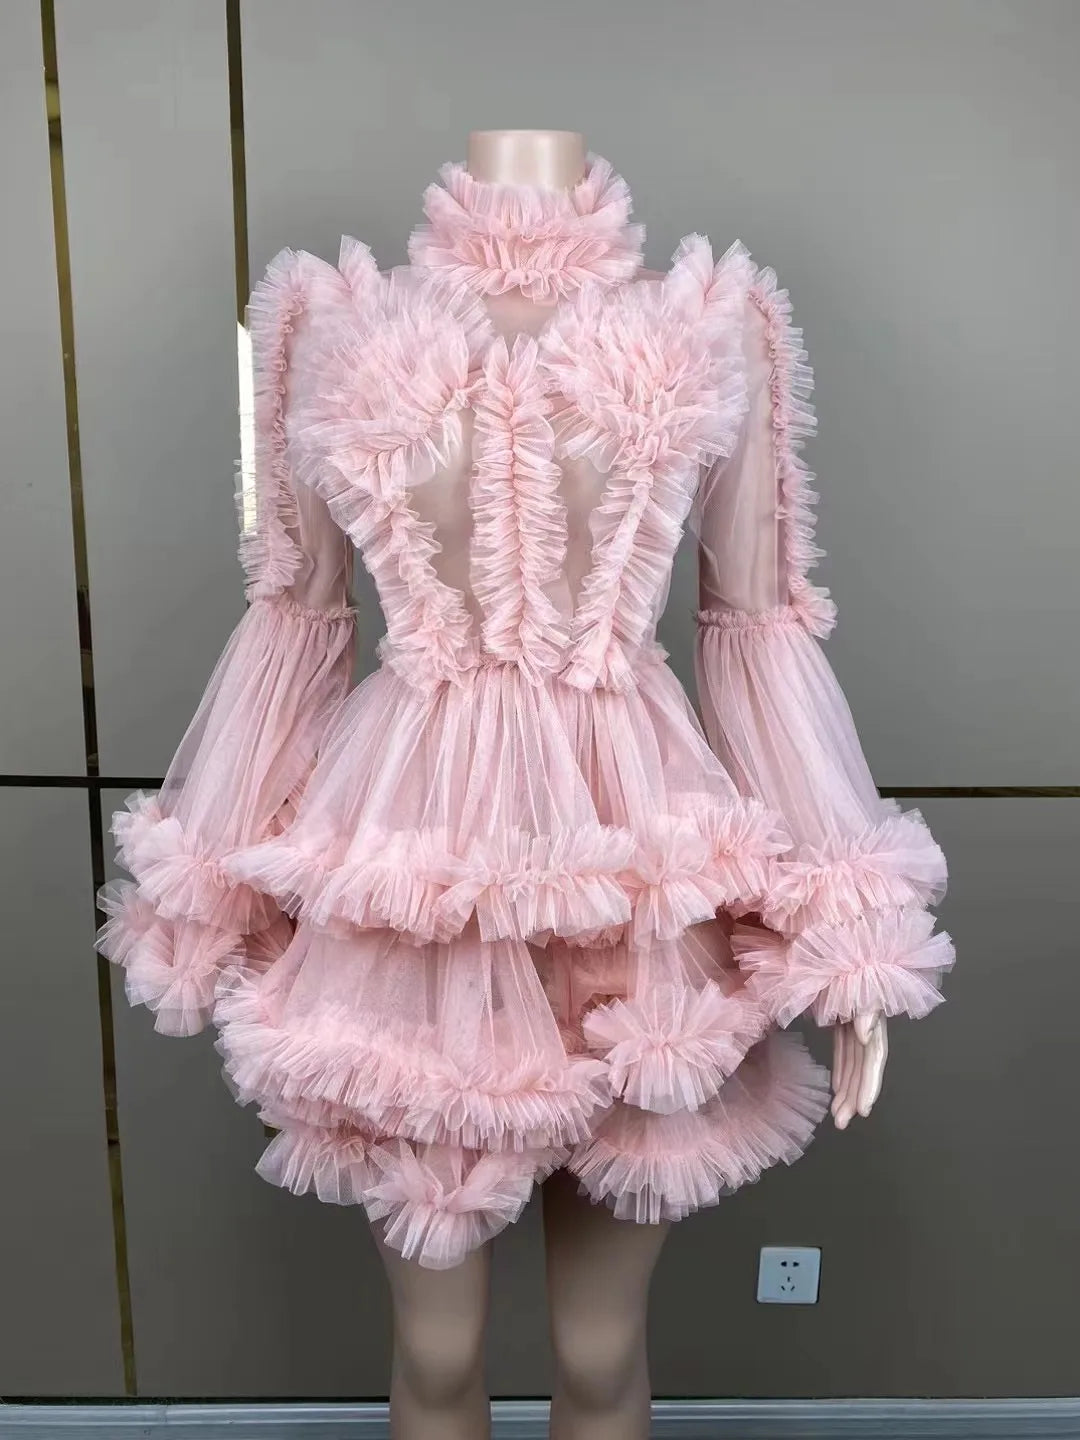 New Design Pink Tube Tutu Mesh Dresses for Women Sexy Birthday Party Prom Evening Dress Photo Shoot Wear